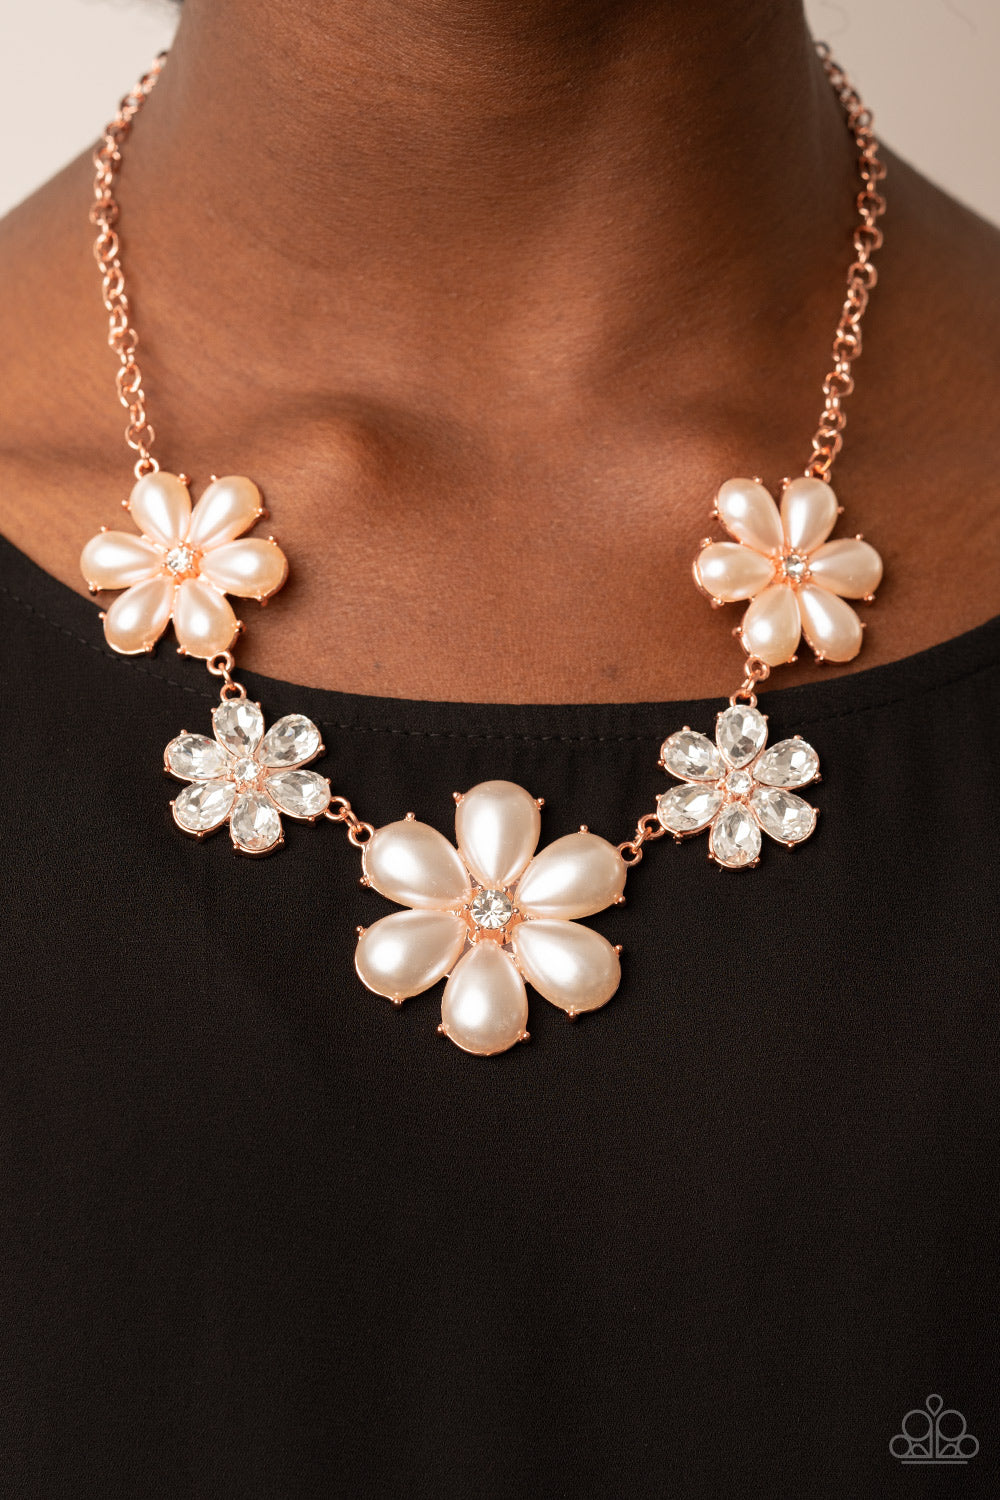 Peach Blossom Necklace - Statement